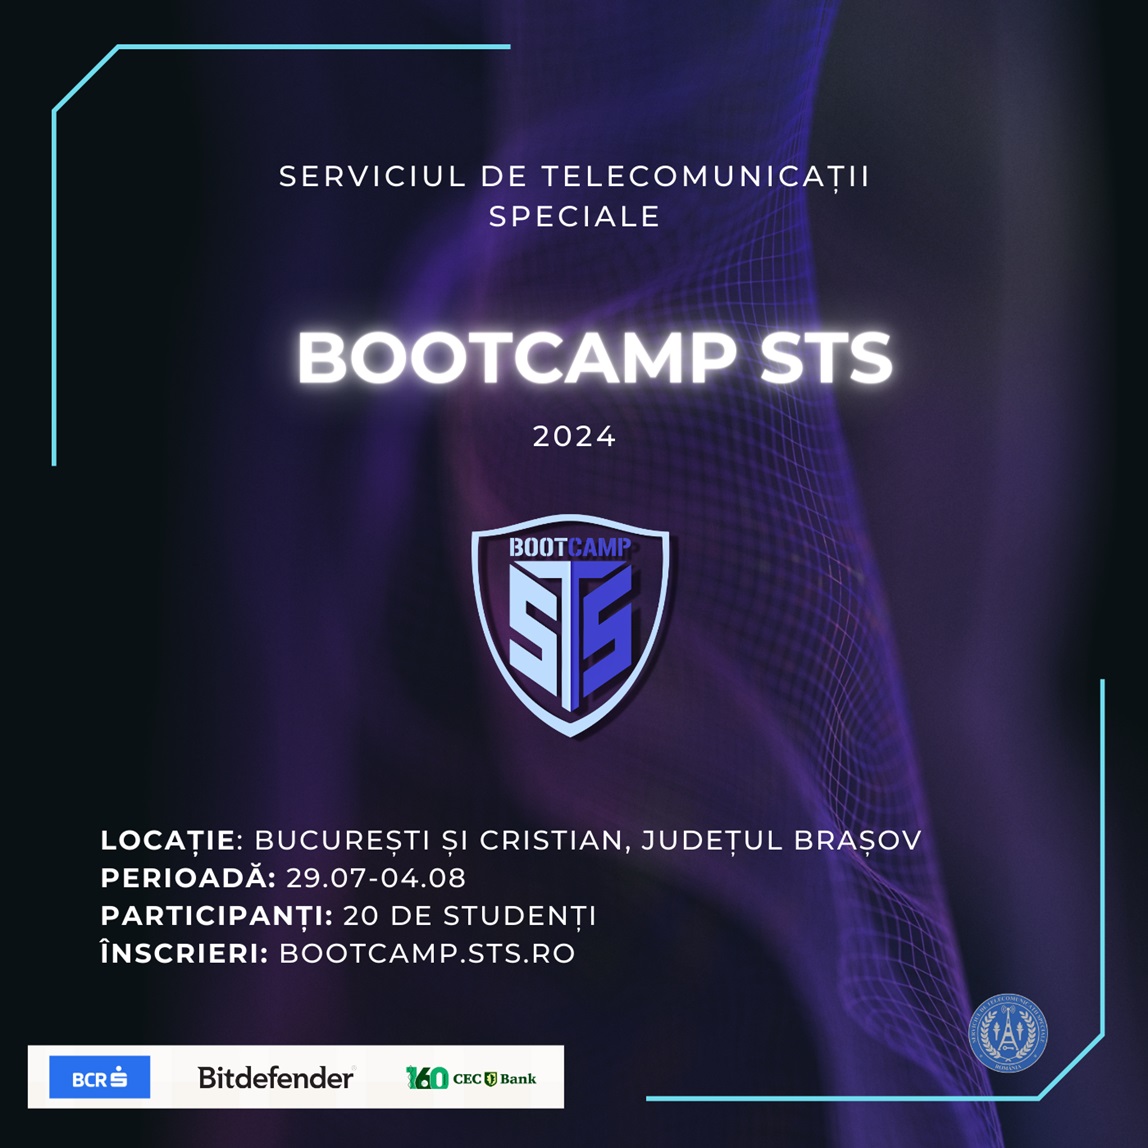 BootCamp STS 2024